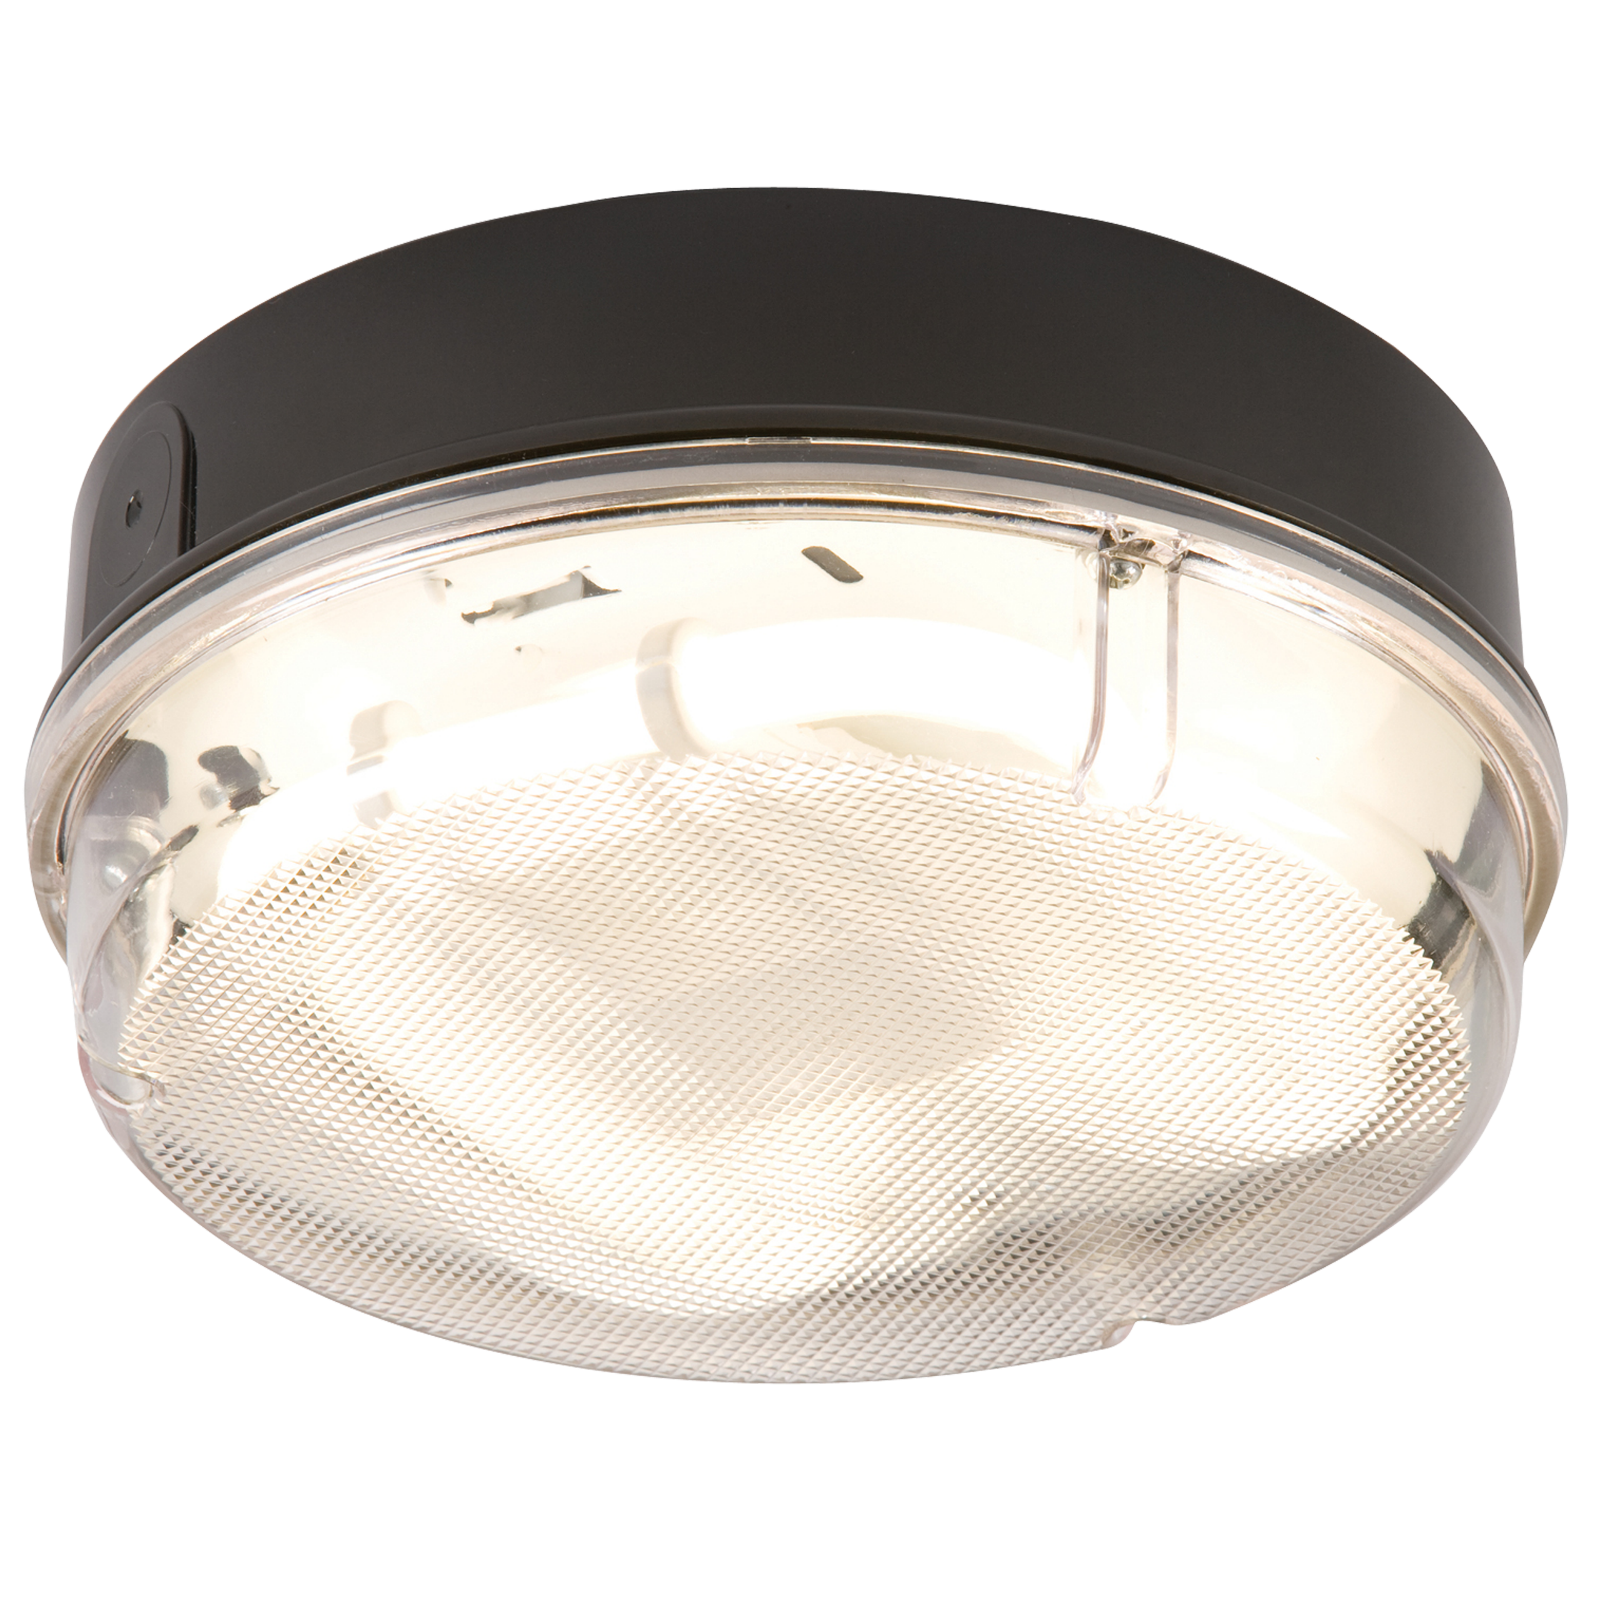 IP65 16W HF Round Bulkhead With Prismatic Diffuser And Black Base - TPR16BPHF 